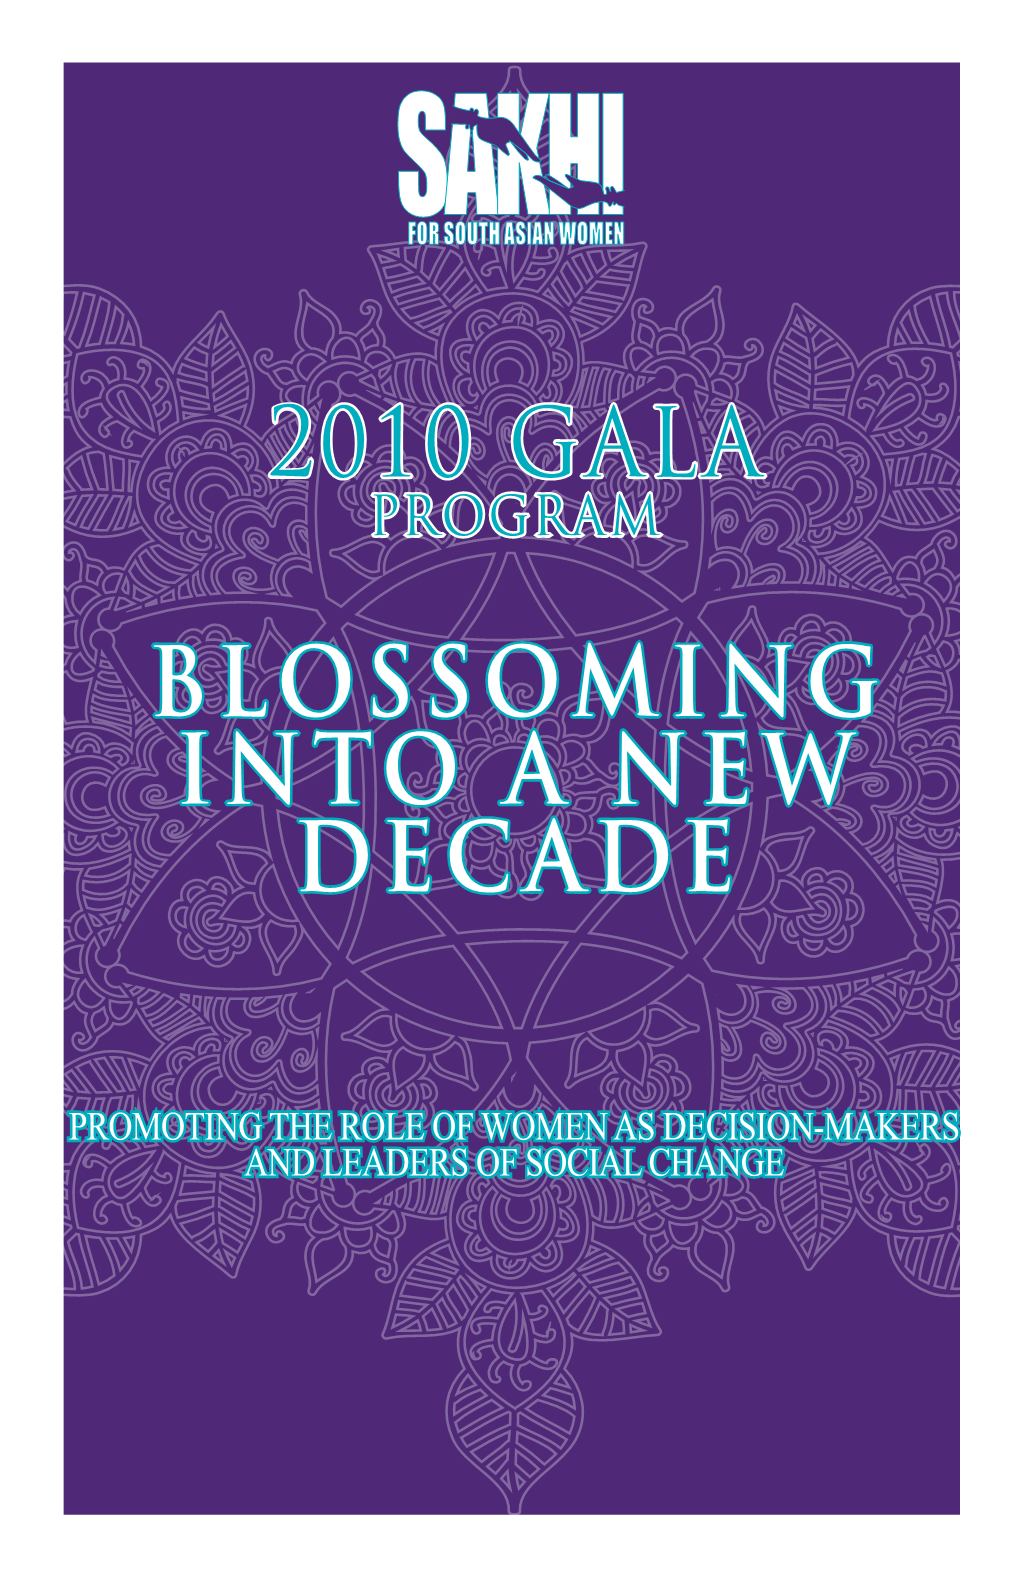 Blossoming Into a New Decade 2010 Gala